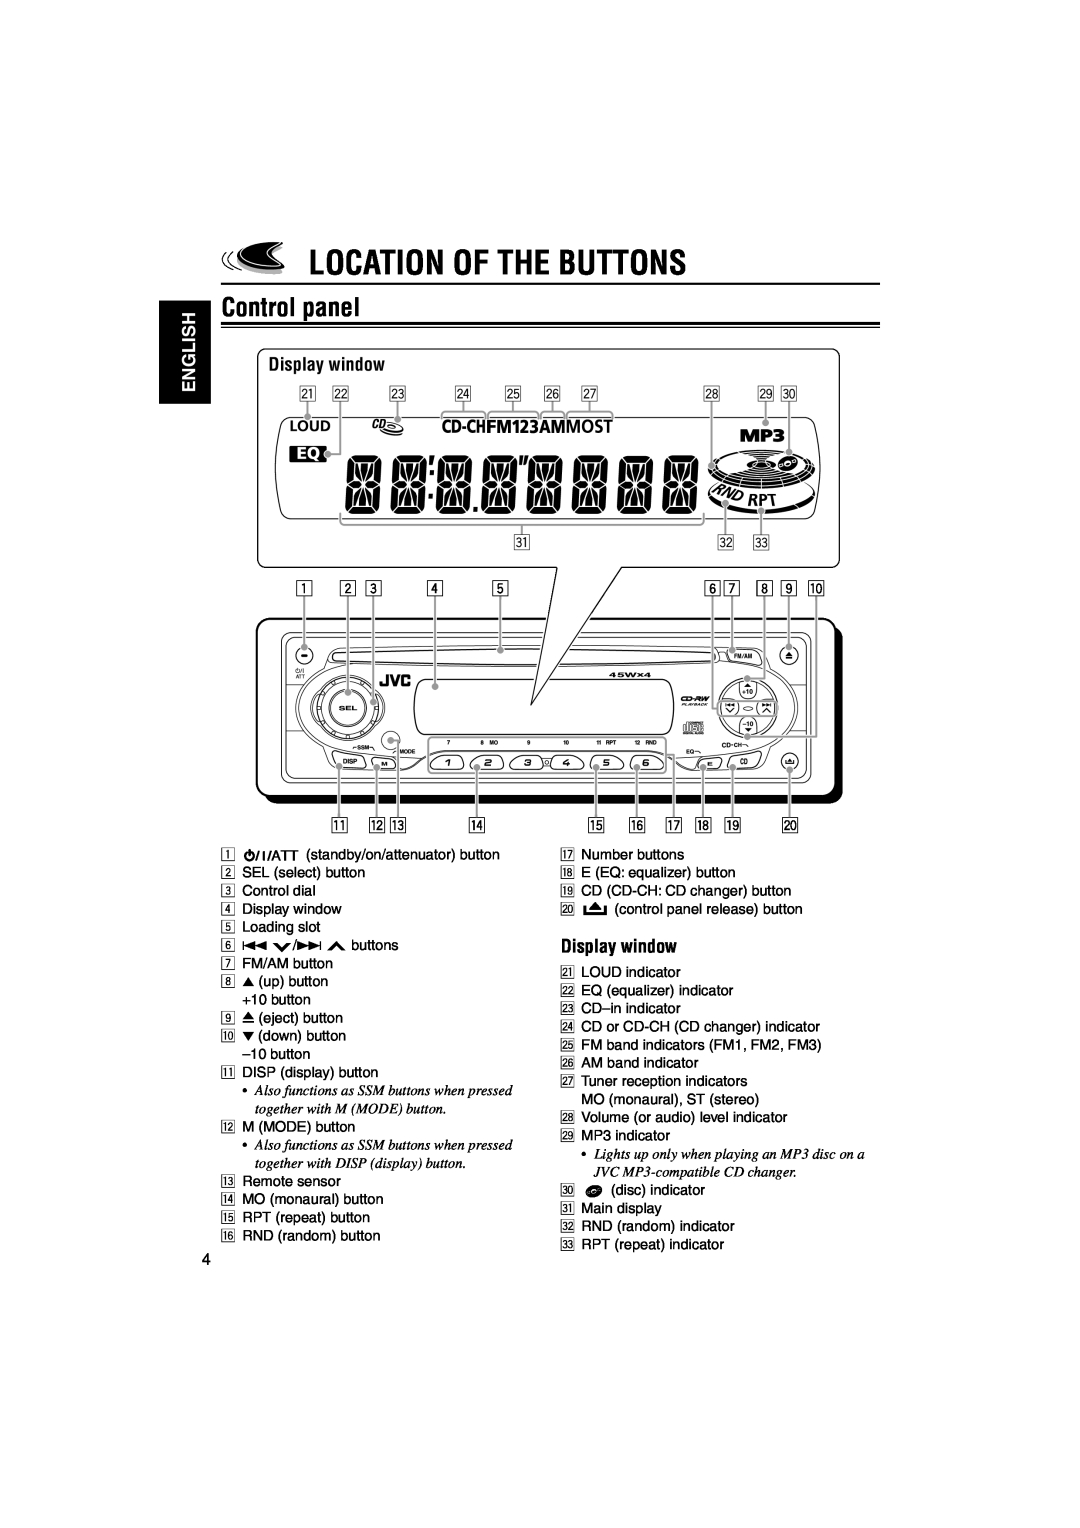 JVC KD-SX745, KD-SX695 manual Location Of The Buttons, Control panel, English, Display window 